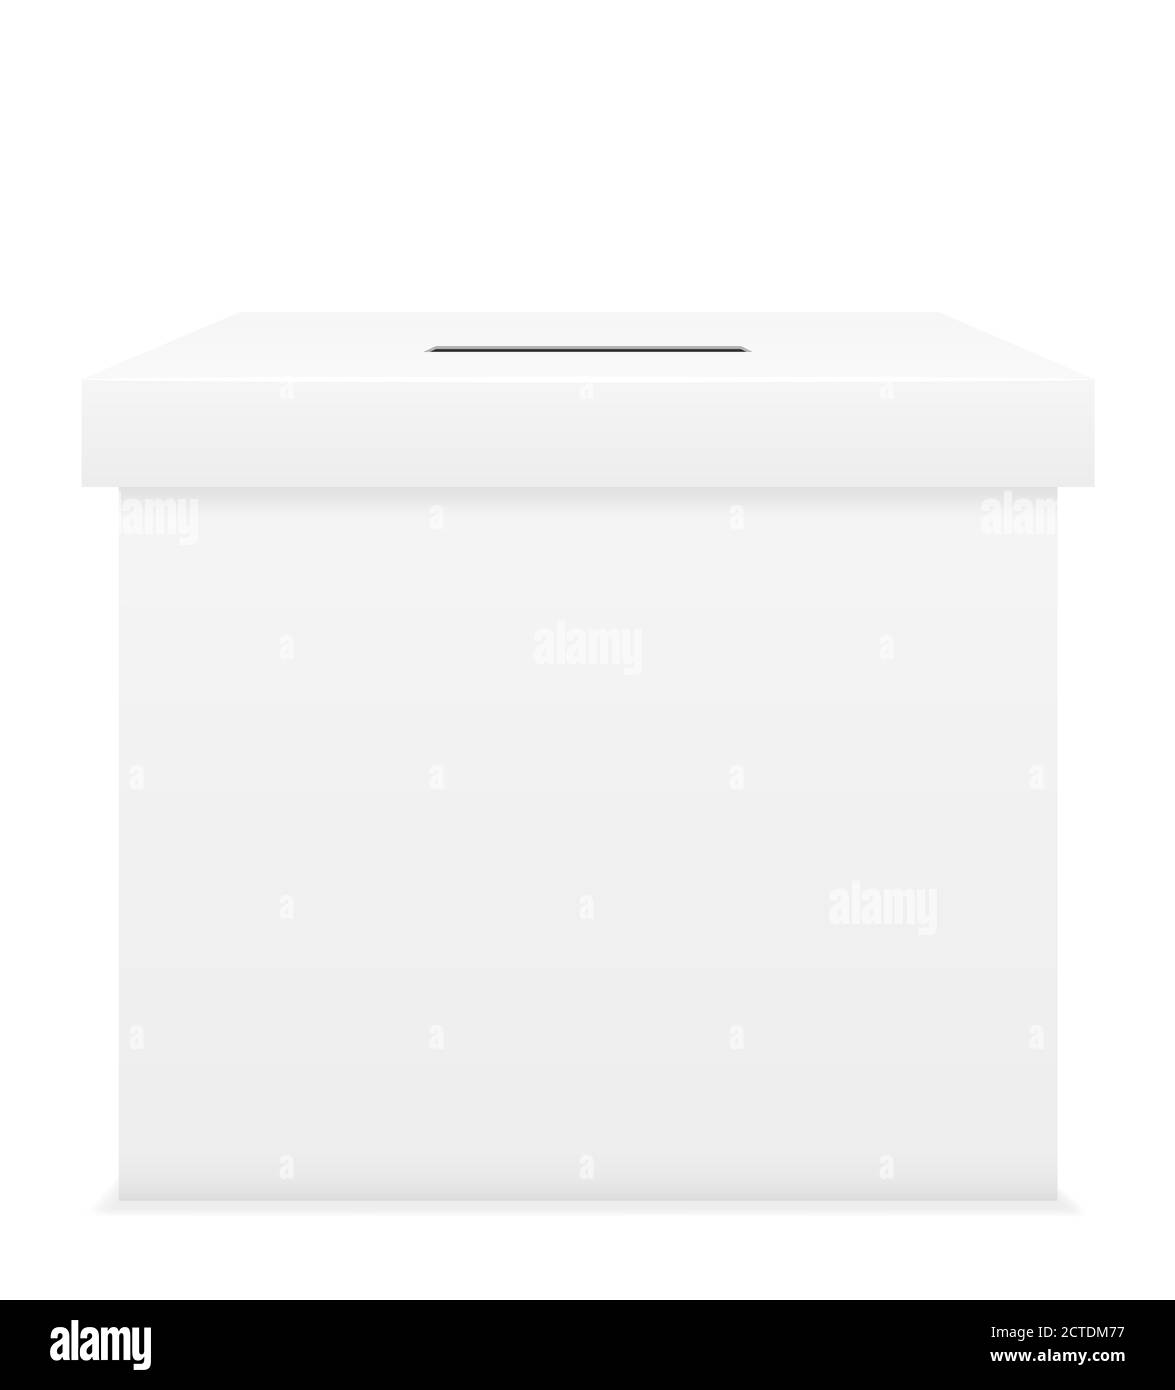 ballot box for election voting vector illustration isolated on white background Stock Vector